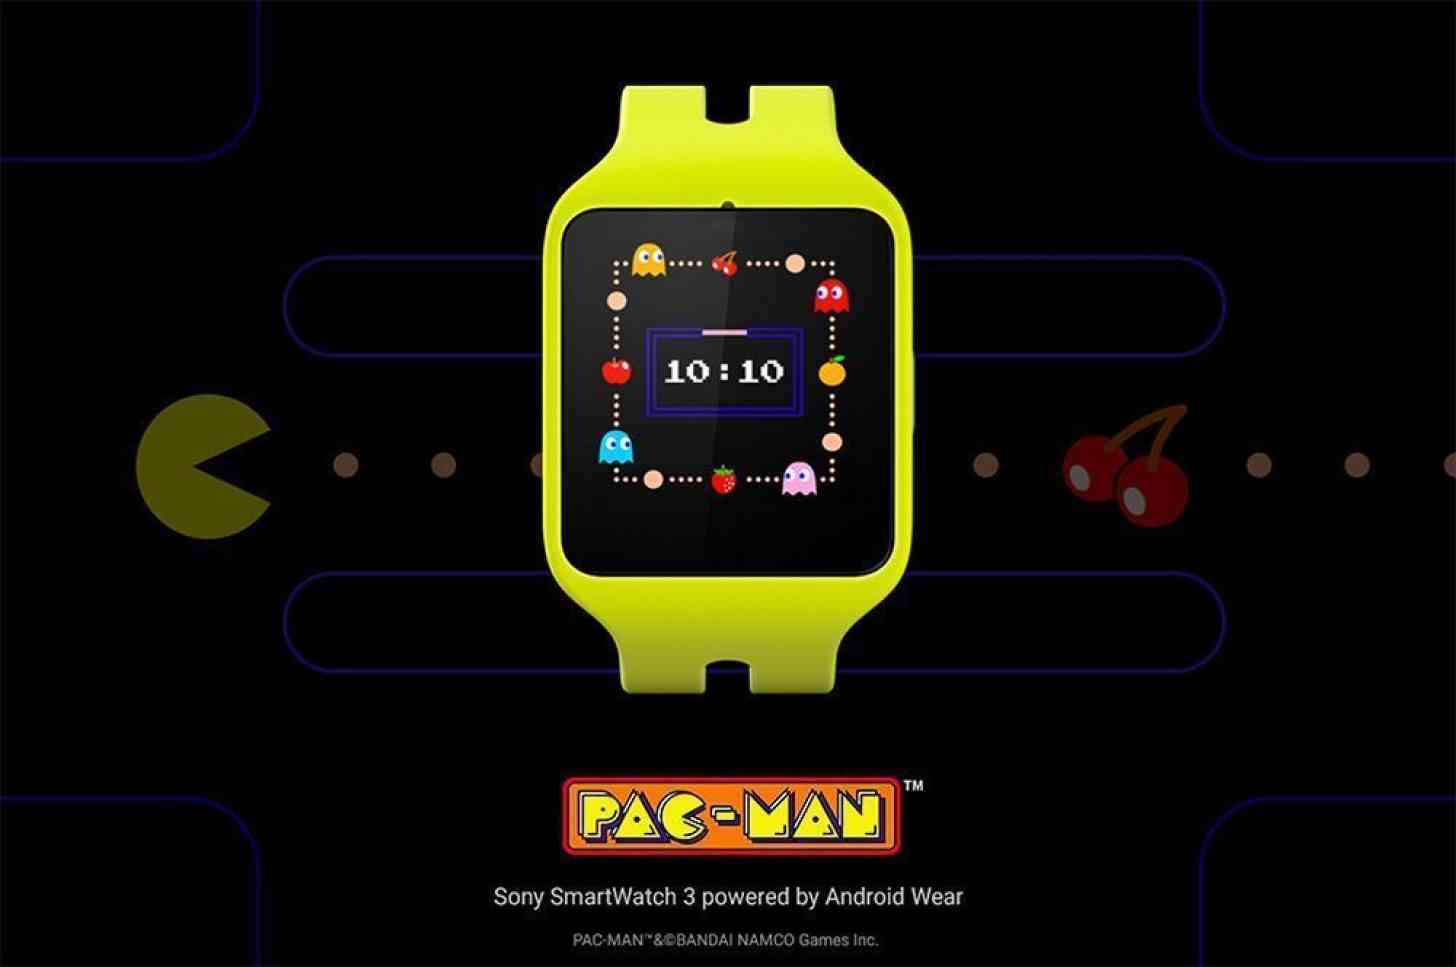 Pac-Man Android Wear watch face